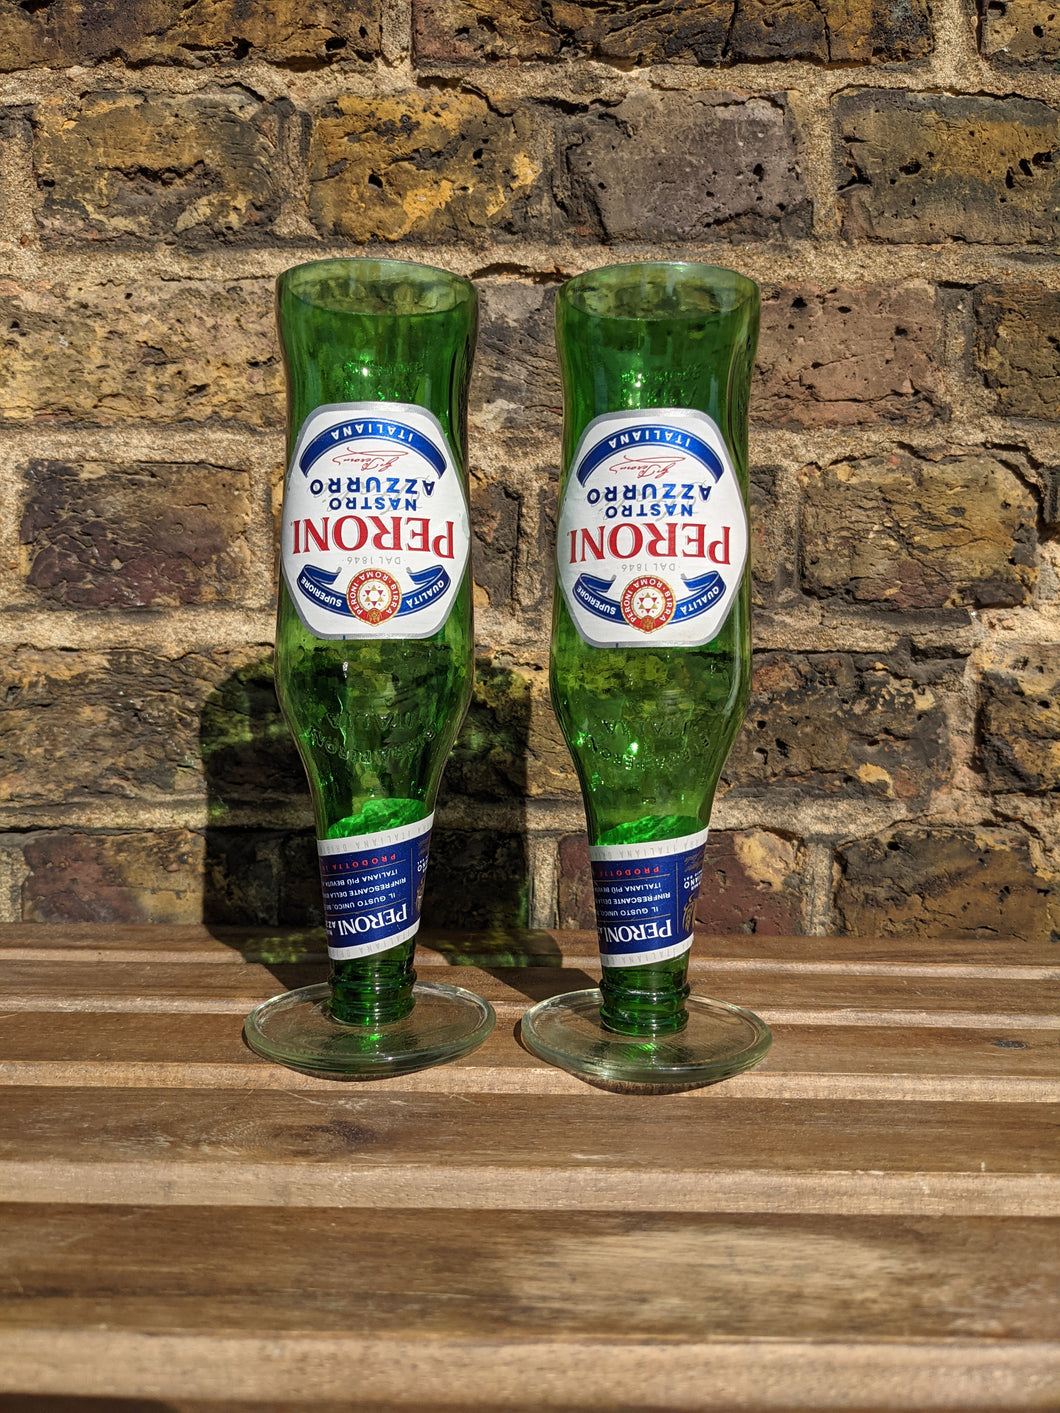 Peroni beer bottle tall glasses